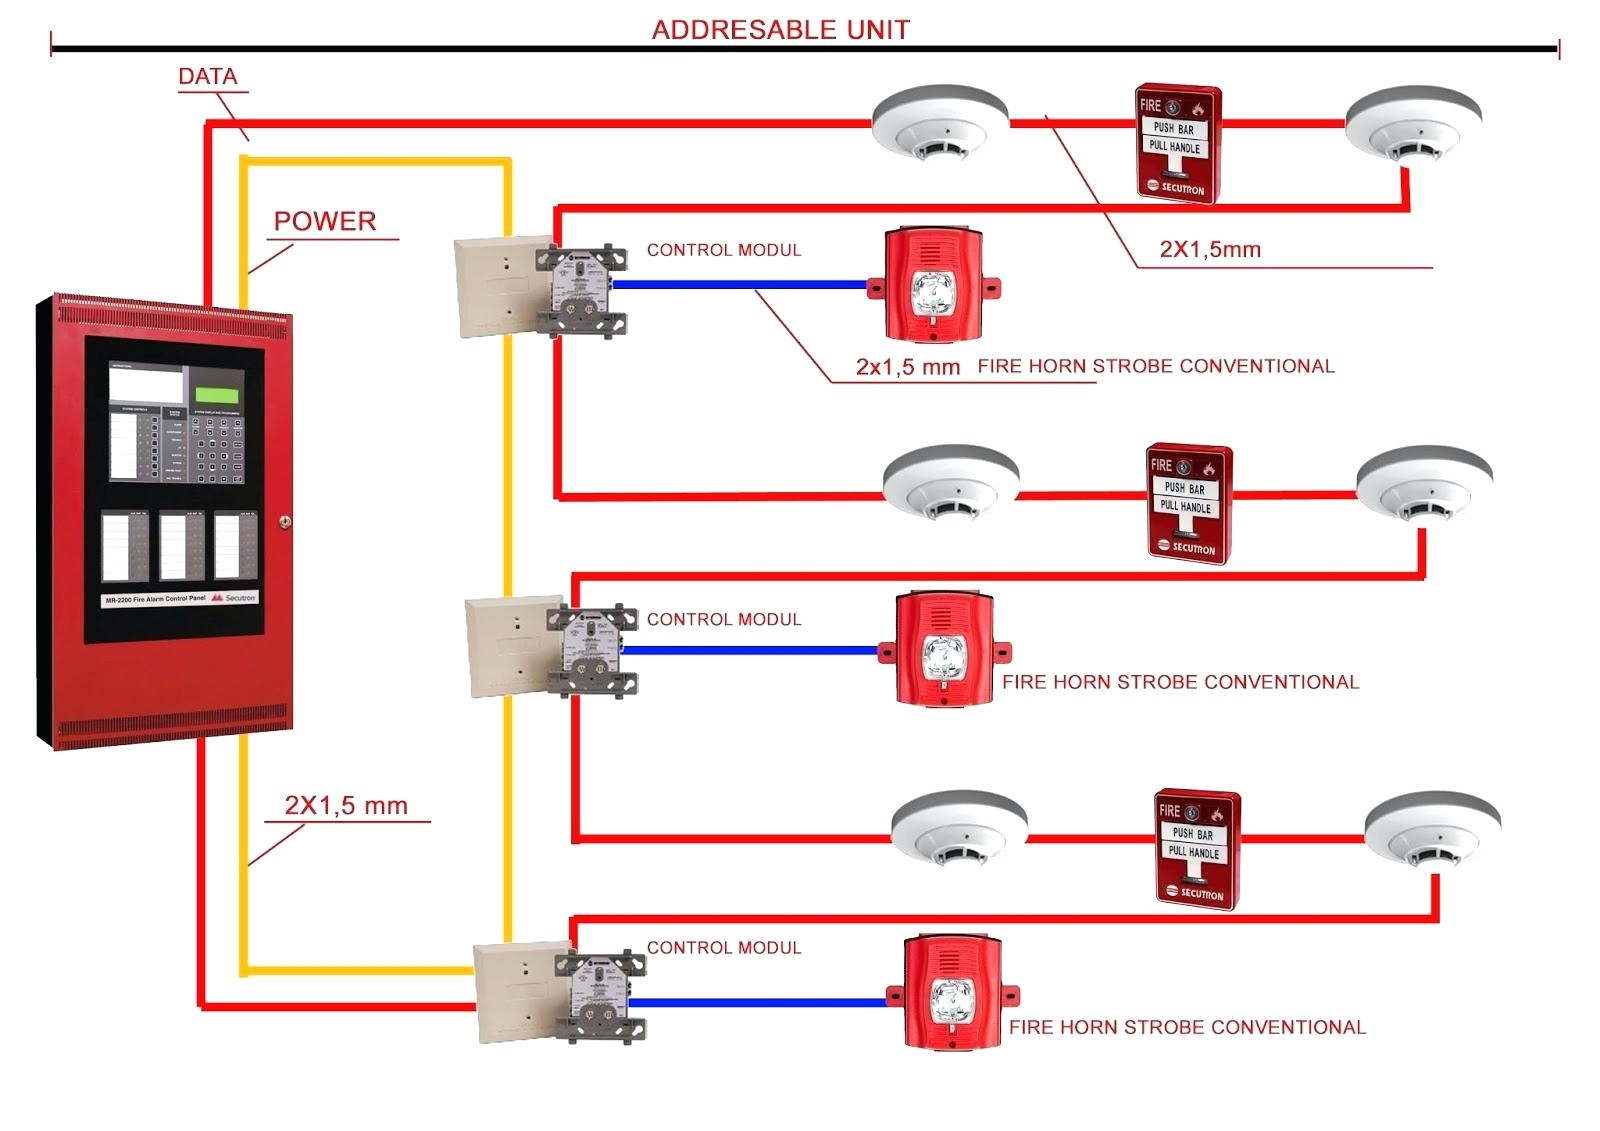 Circuit Diagram Addressable Fire Alarm System Wiring Pdf And With Lovely Control Panel